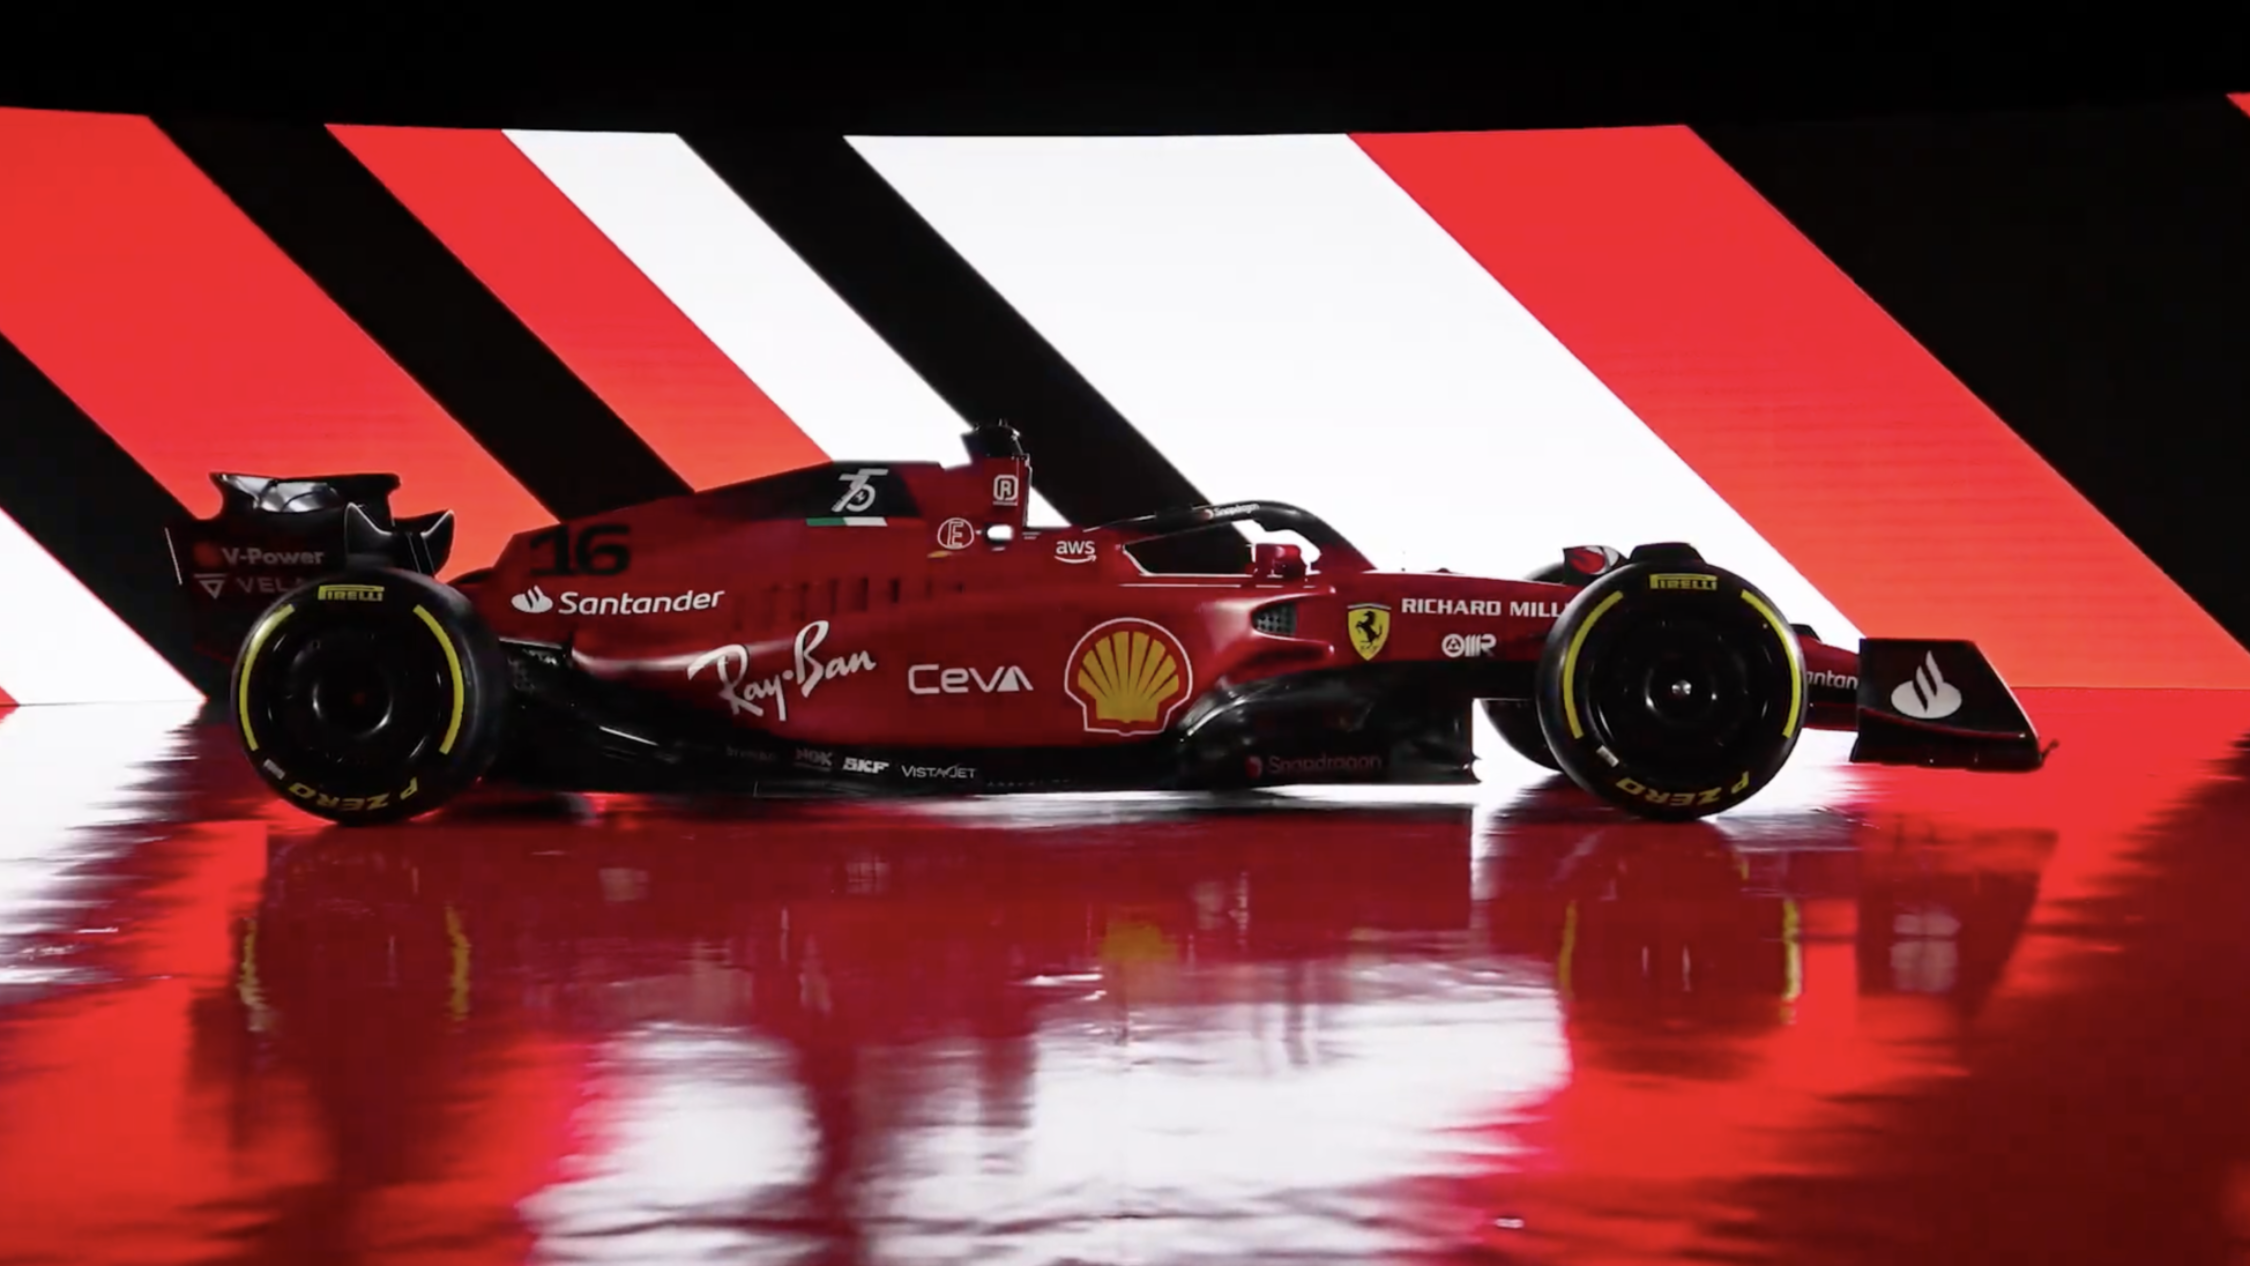 In Photo: Every Angle Of The New Ferrari F1 75 F1 Car